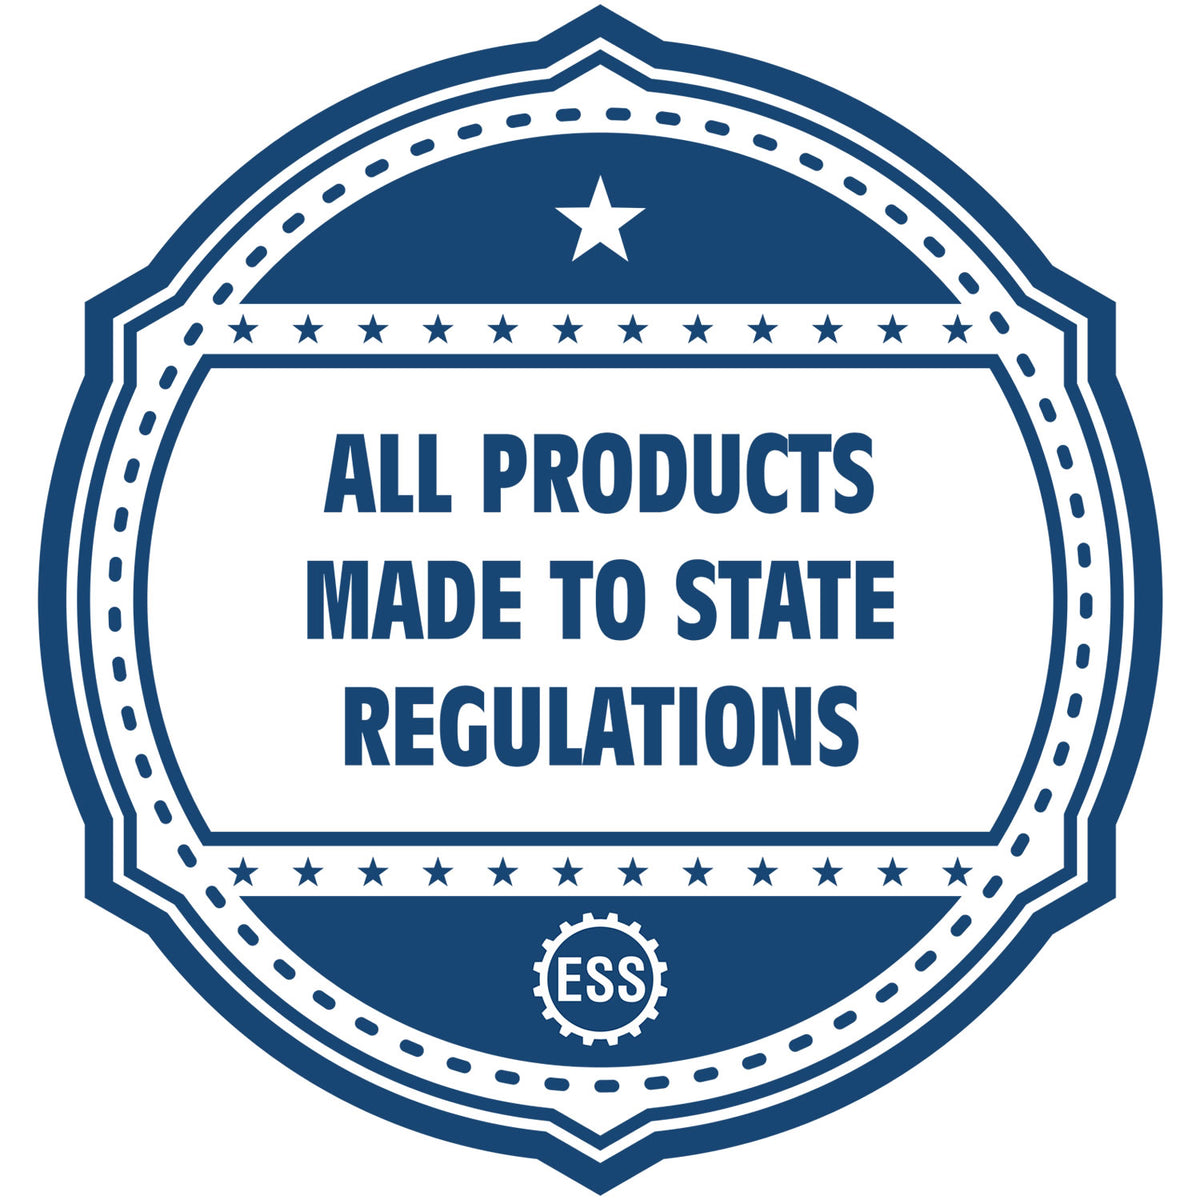 An icon or badge element for the Wyoming Desk Architect Embossing Seal showing that this product is made in compliance with state regulations.